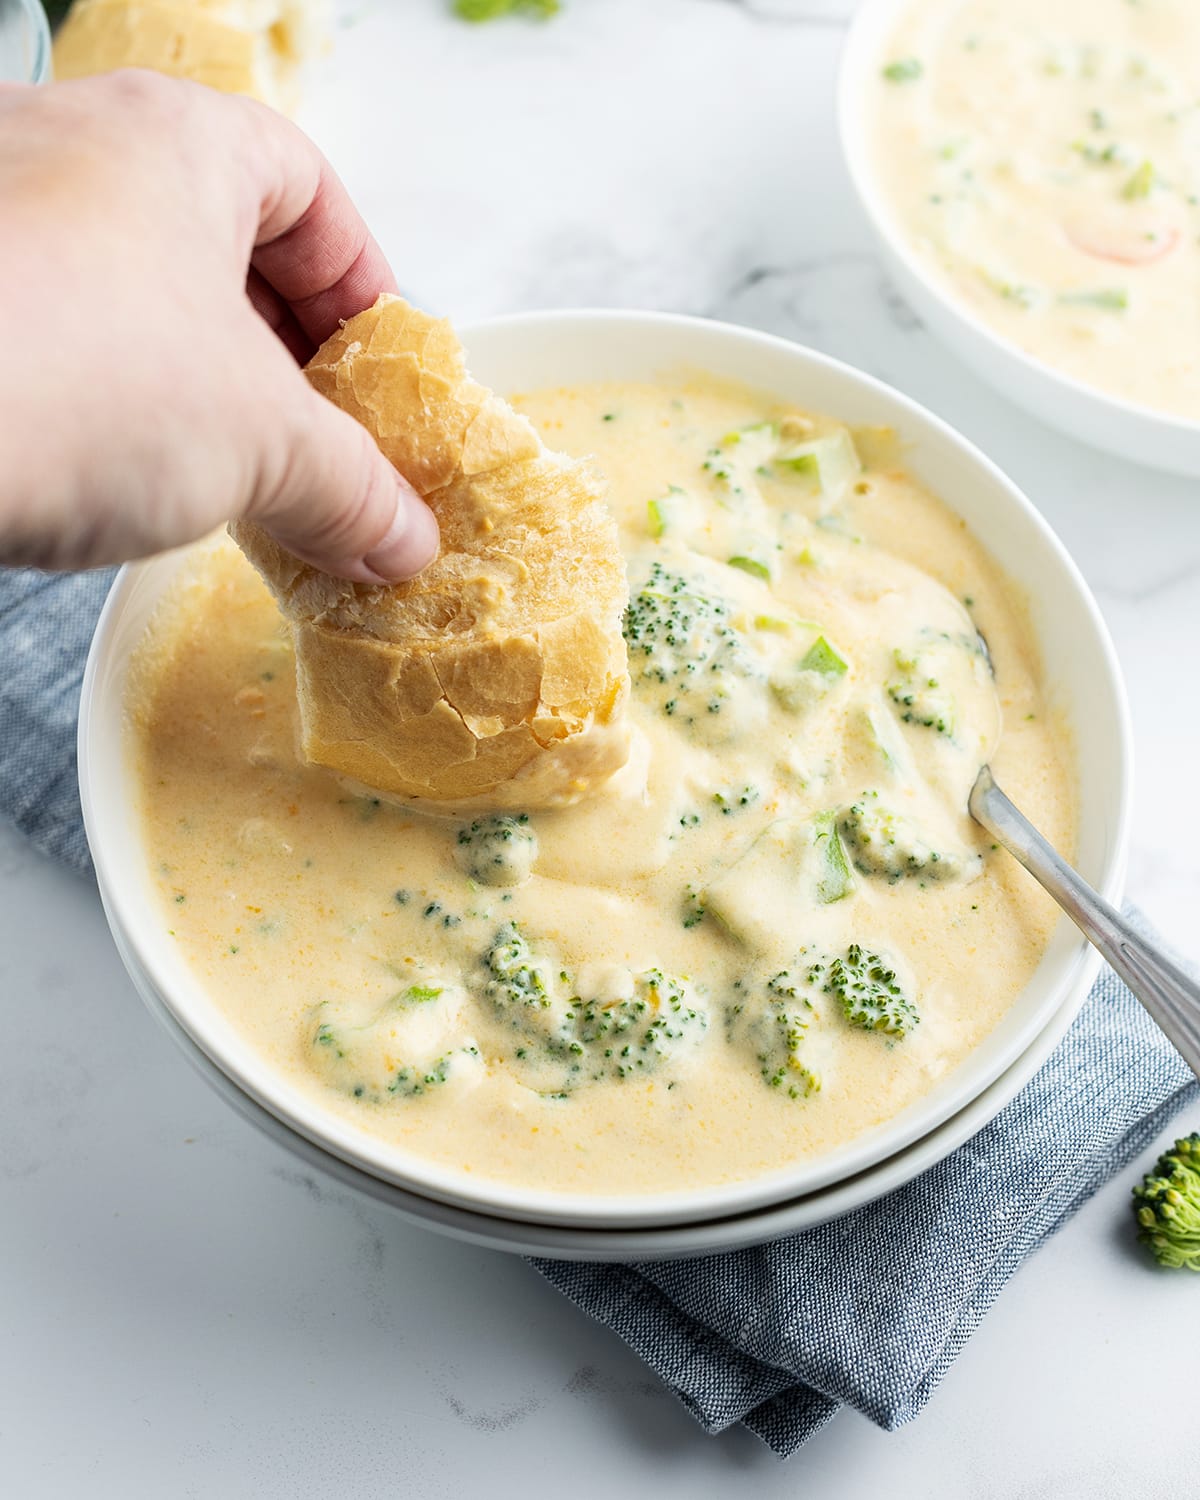 A hand holding a piece of bread dipping into a bowl of broccoli cheese soup.